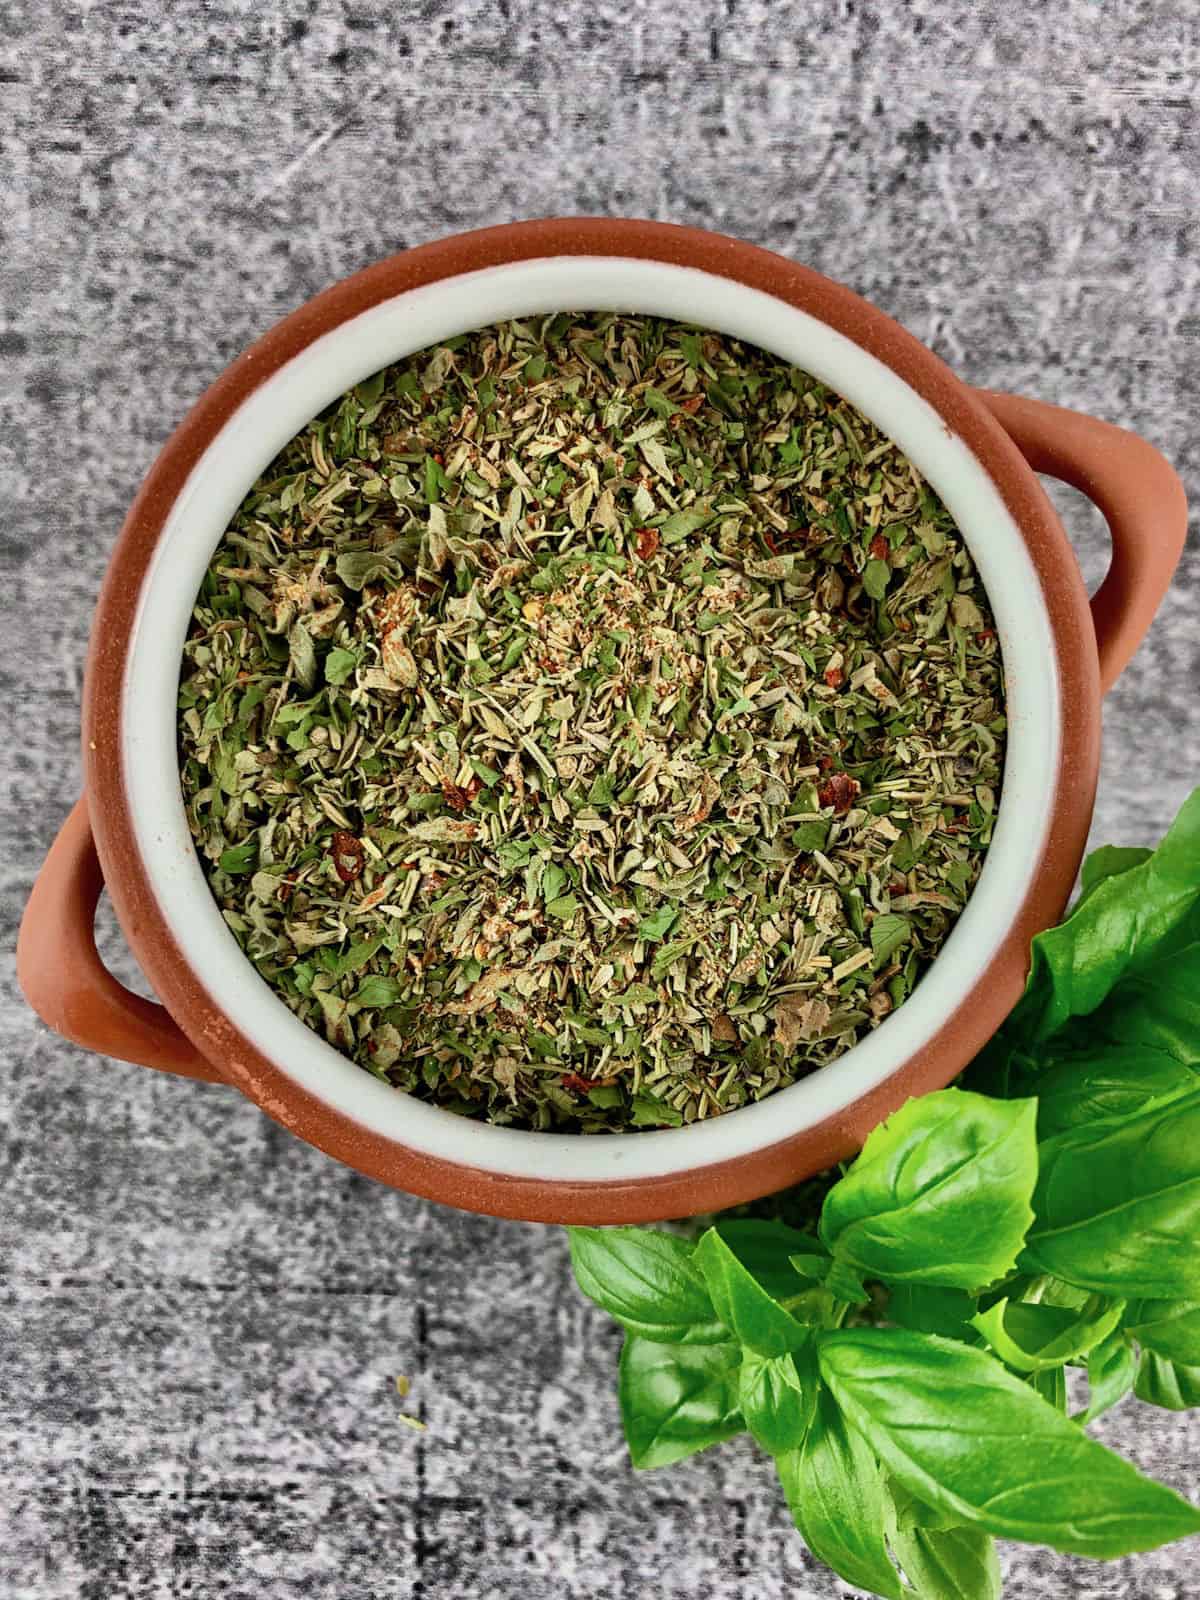 ITALIAN HERB SEASONING IN TERRACOTTA BOWL WITH BASIL SPRIG ON THE SIDE